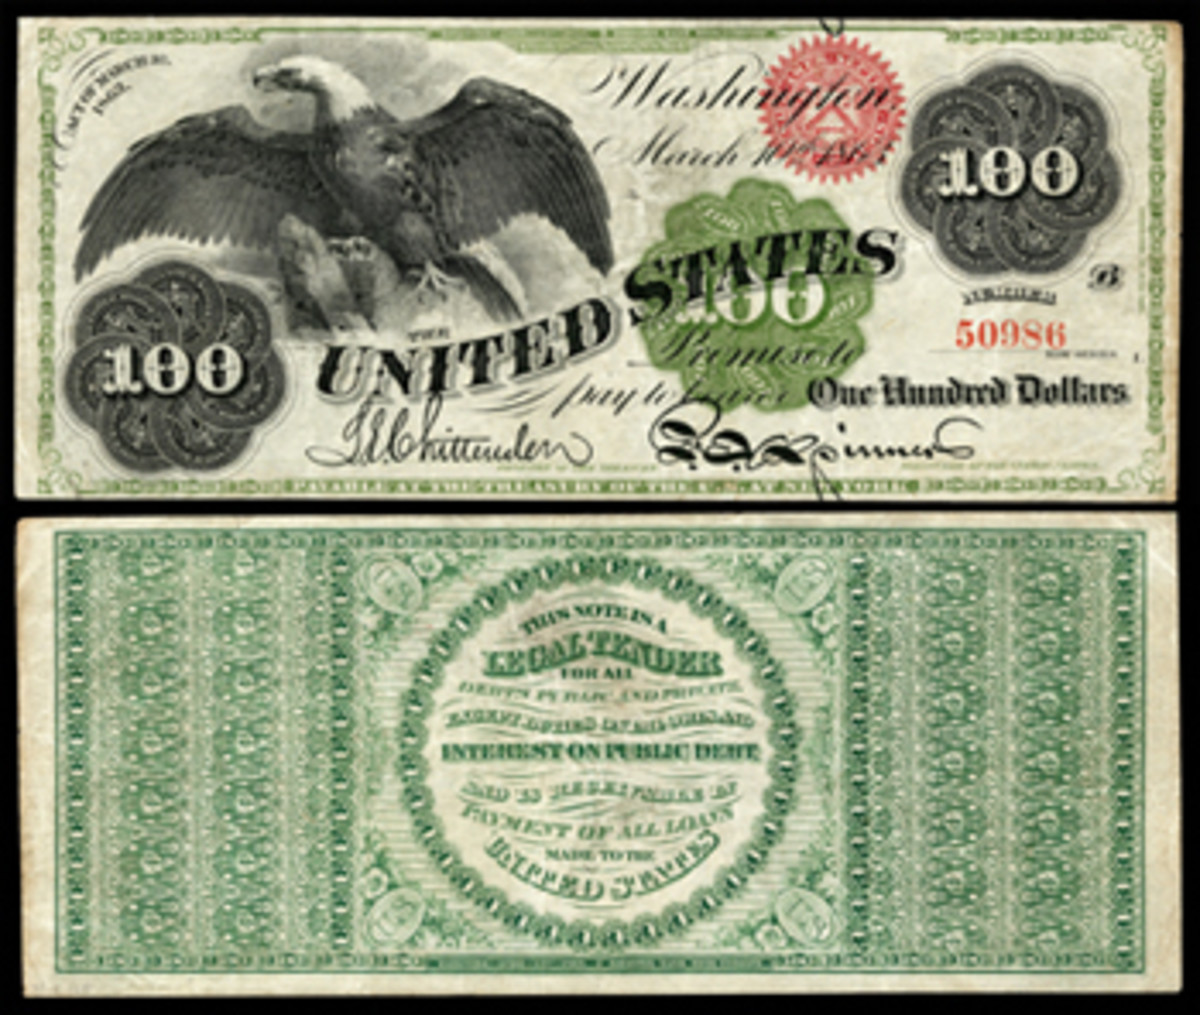  (Image courtesy National Numismatic Collection, National Museum of American History, Wikipedia.org.)